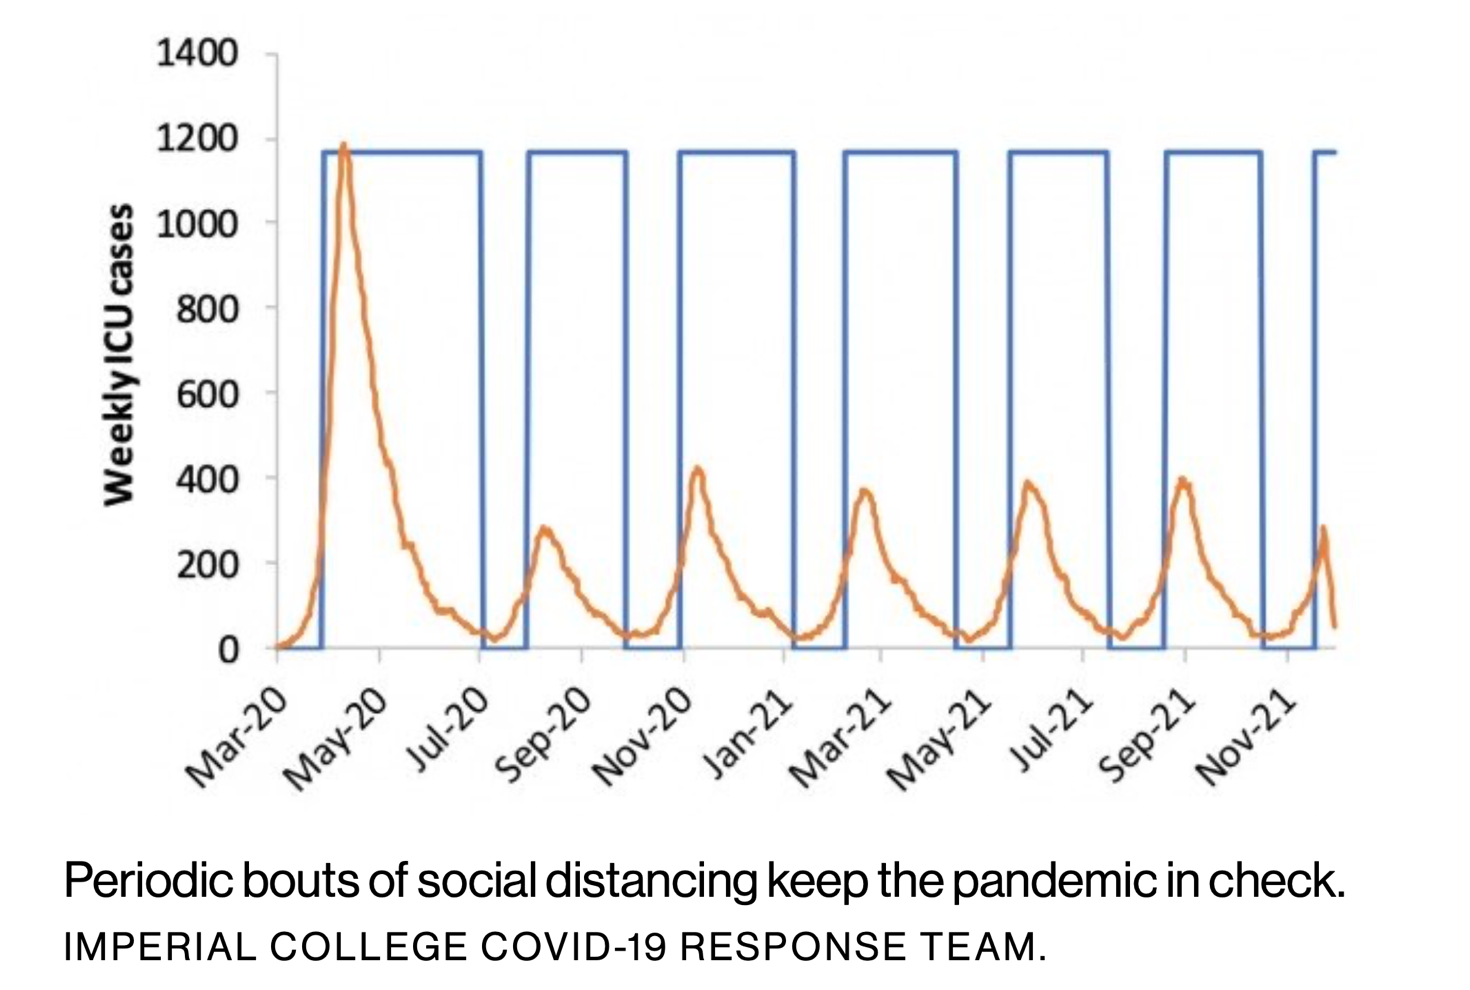 Periodic bouts of social distancing keep the pandemic in check